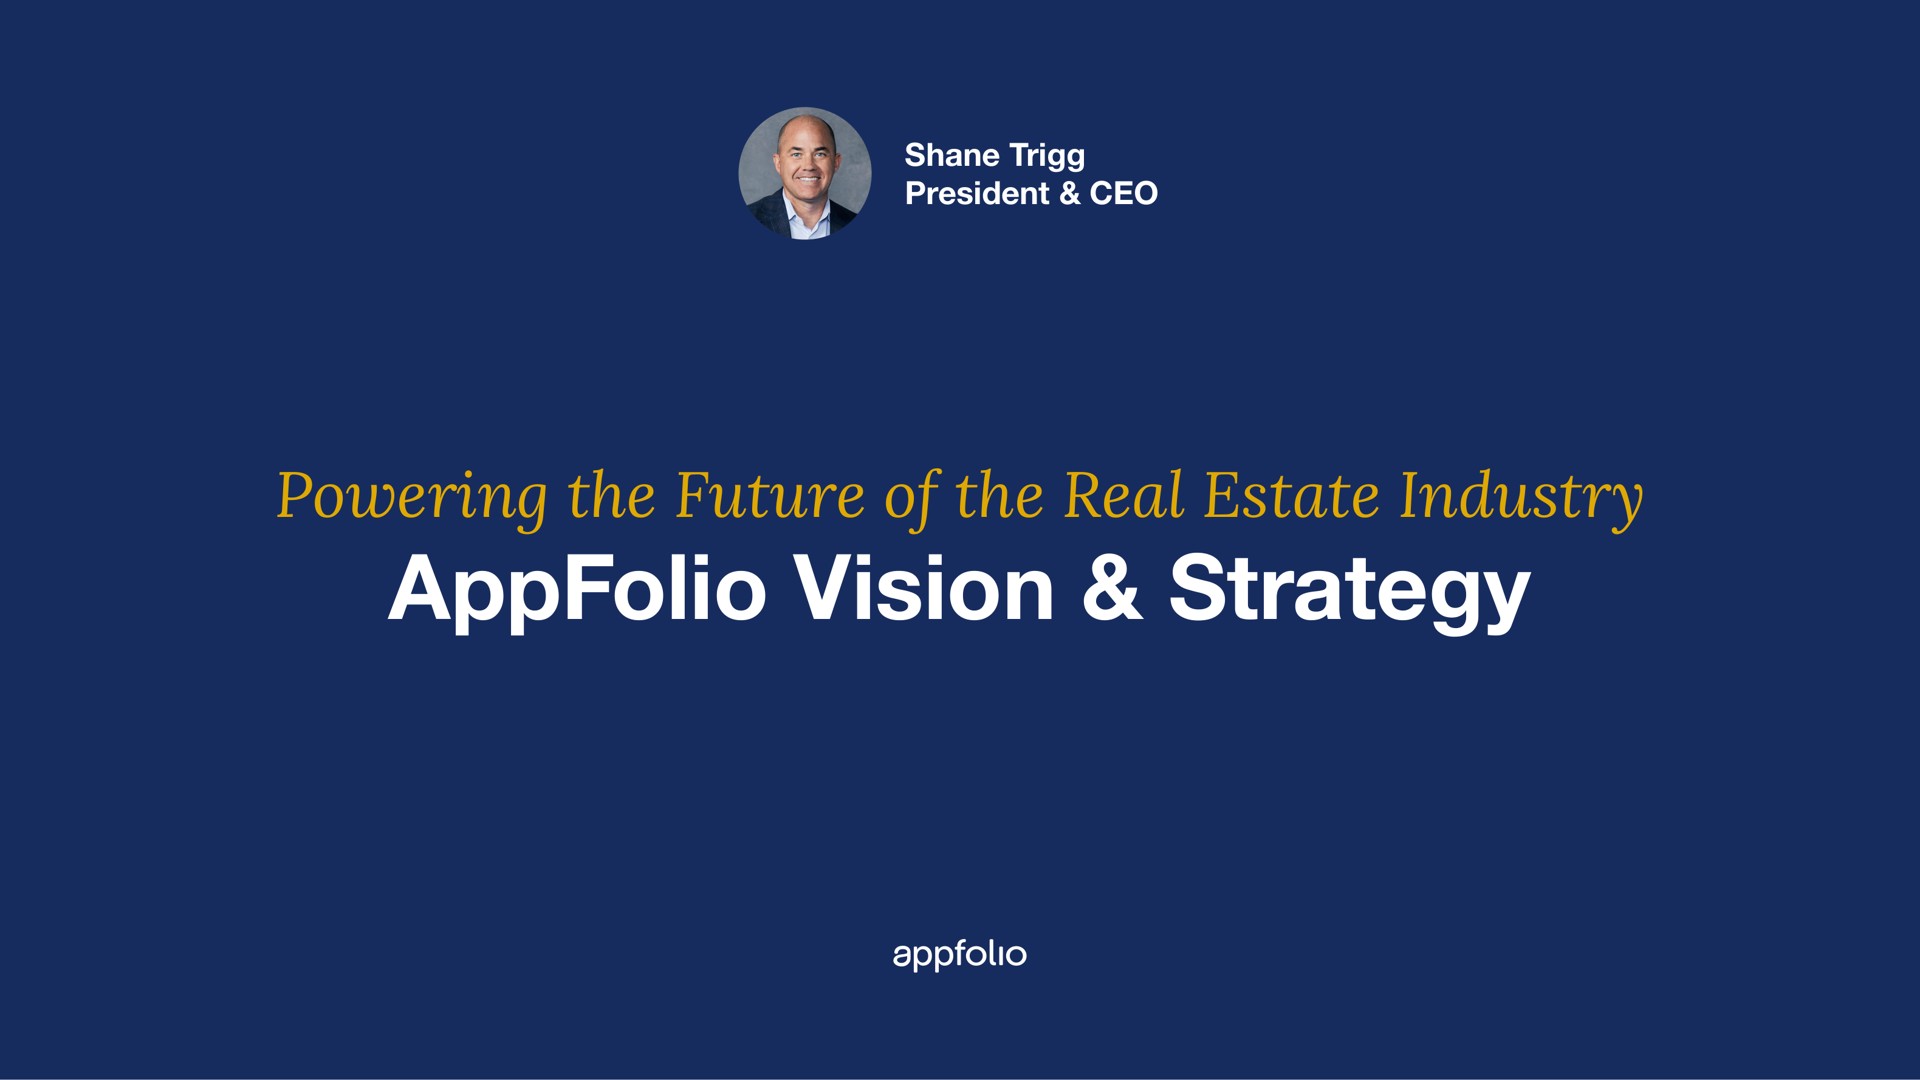 powering the future of the real estate industry vision strategy we | AppFolio